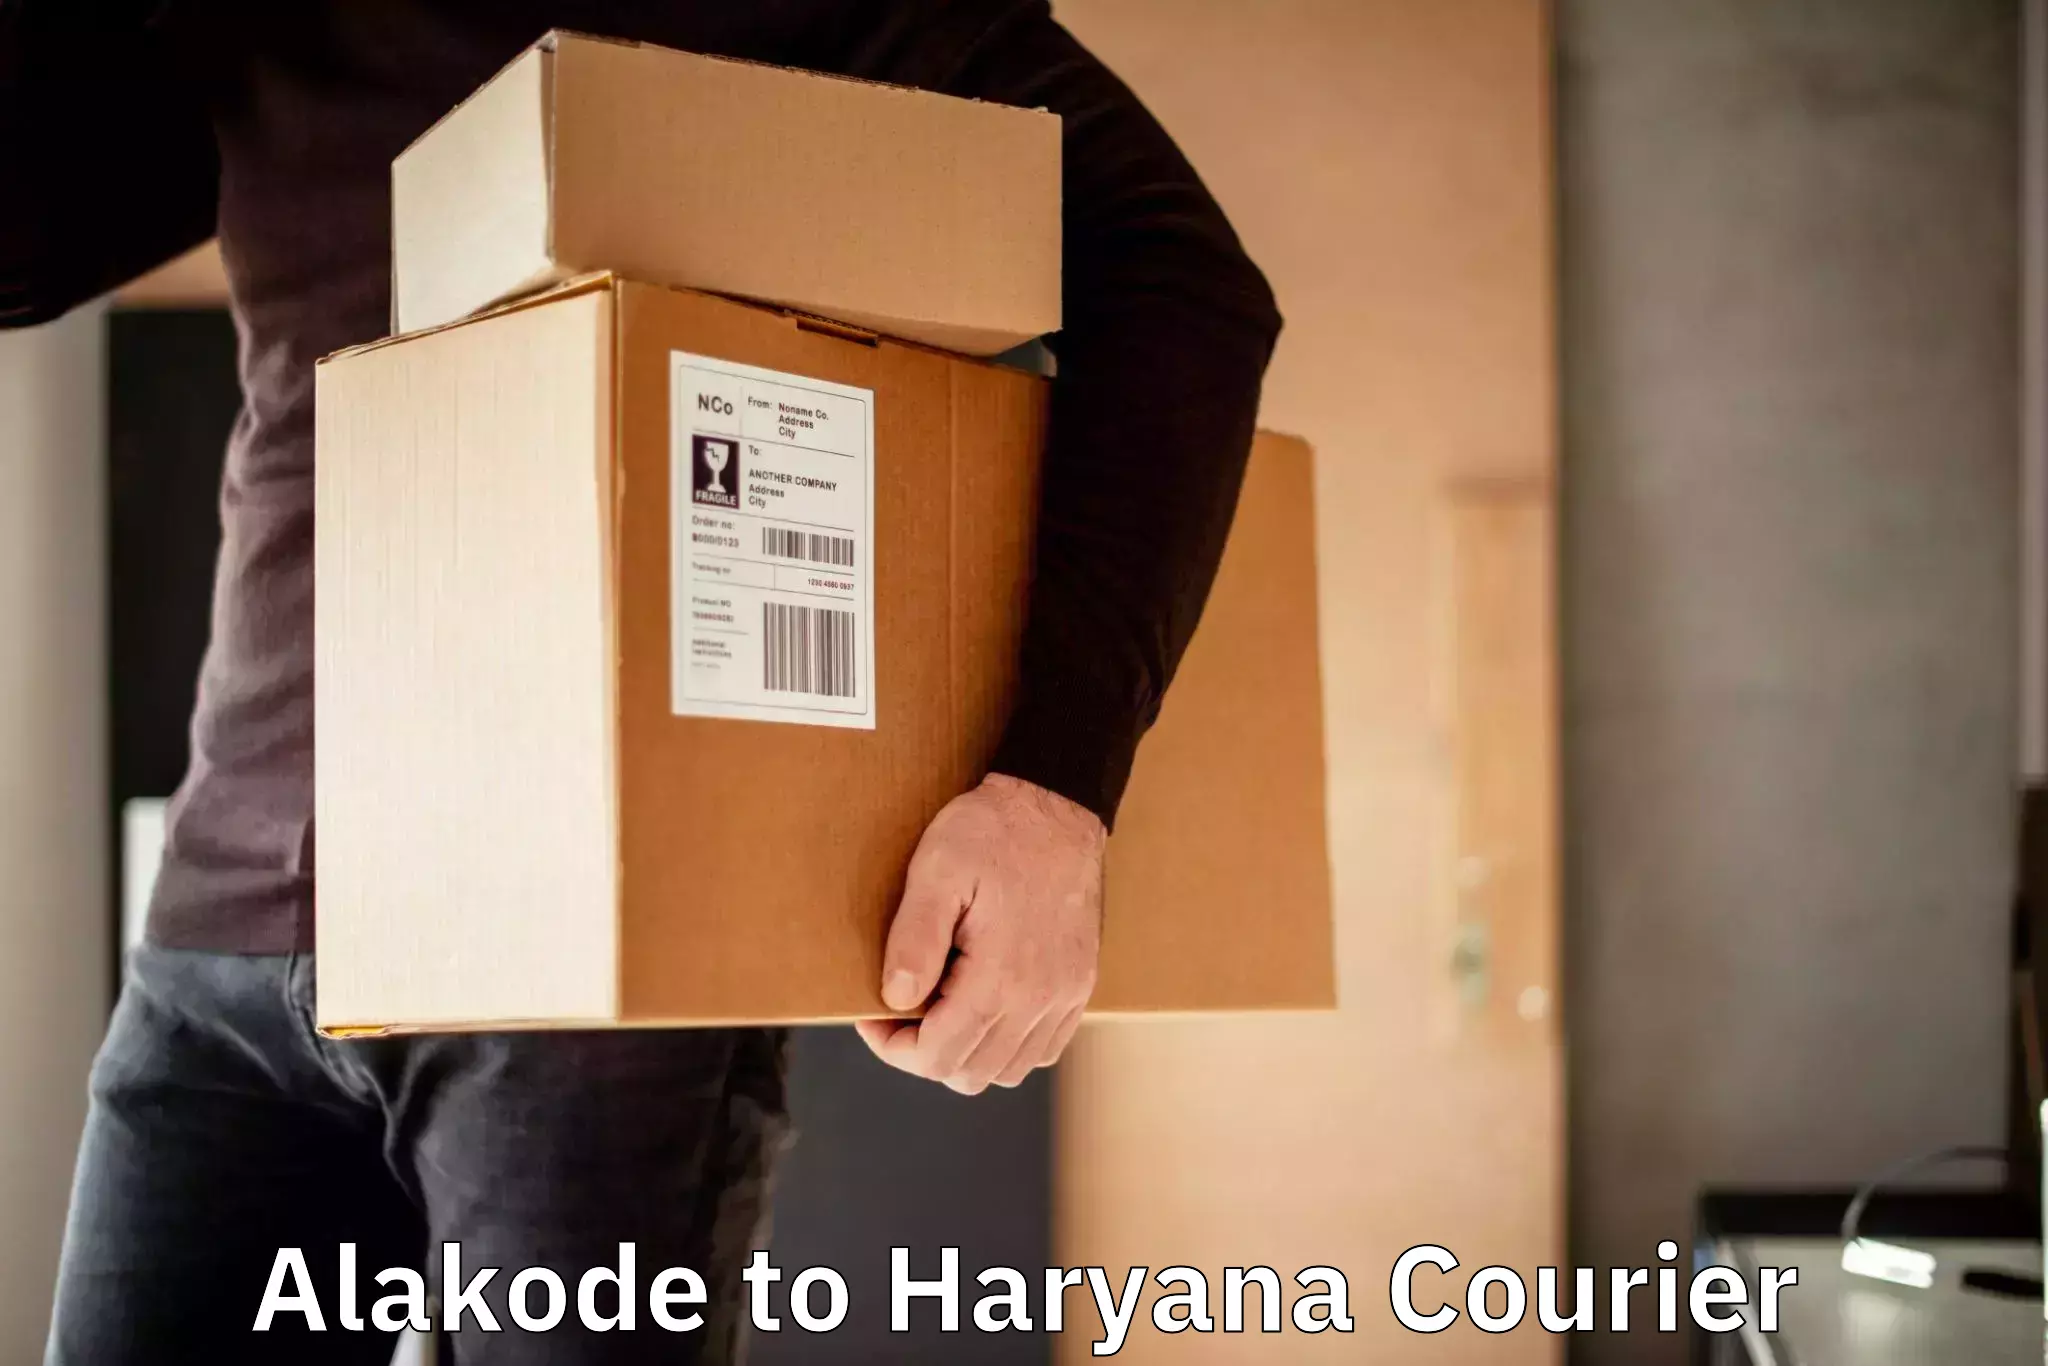 Quality courier partnerships Alakode to Chaudhary Charan Singh Haryana Agricultural University Hisar